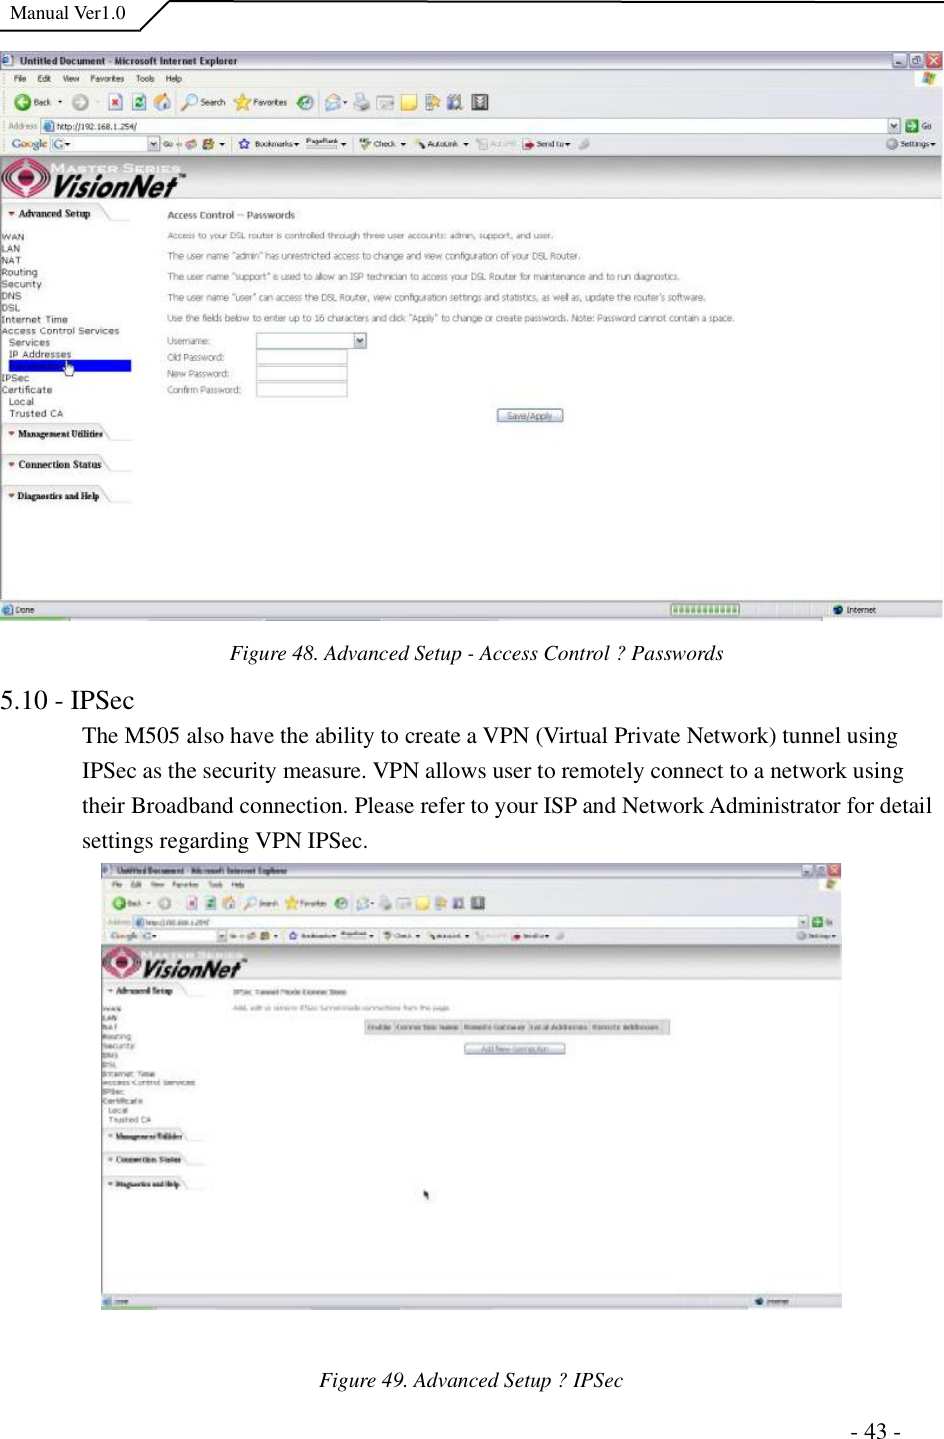  Manual Ver1.0  Figure 48. Advanced Setup - Access Control ?Passwords 5.10 - IPSec The M505 also have the ability to create a VPN (Virtual Private Network) tunnel using IPSec as the security measure. VPN allows user to remotely connect to a network using their Broadband connection. Please refer to your ISP and Network Administrator for detail settings regarding VPN IPSec.  Figure 49. Advanced Setup ?IPSec                                                                      - 43 - 